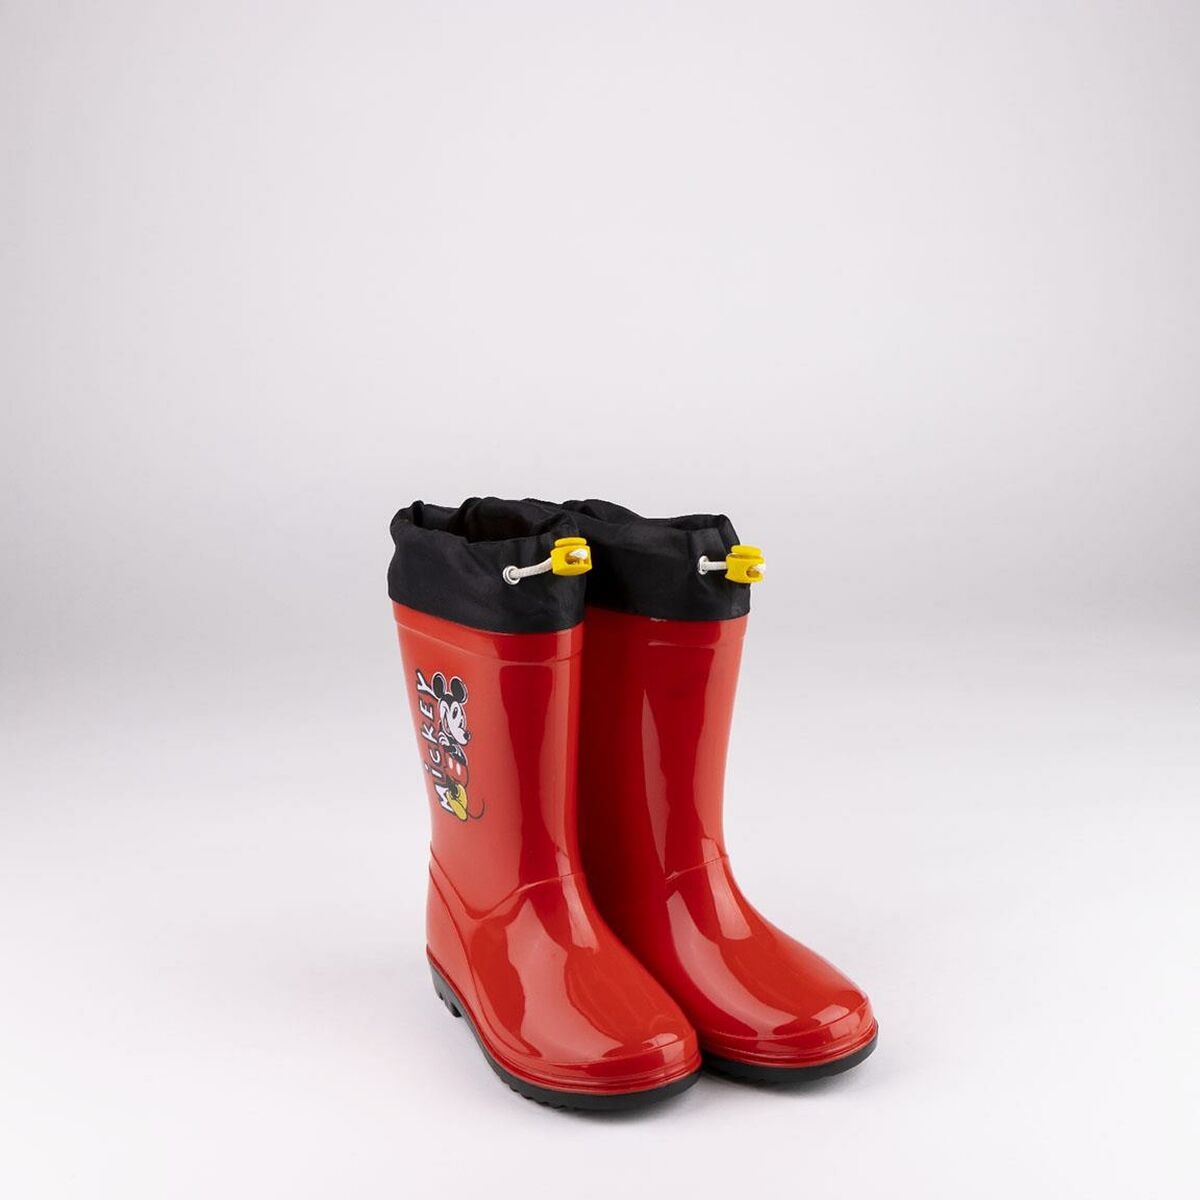 Children's Water Boots Mickey Mouse